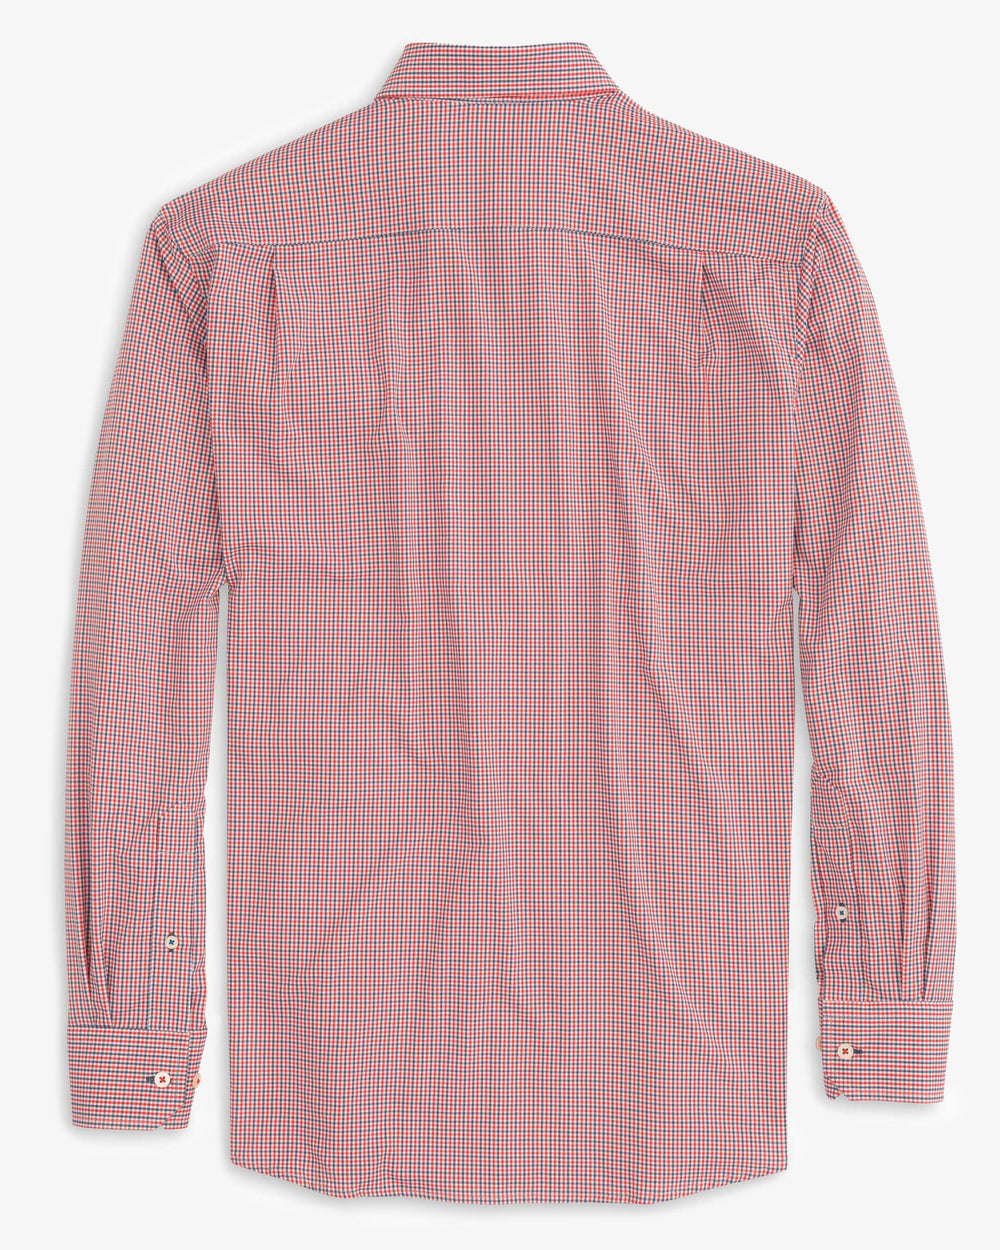 The back of the Men's Bowry Brrr Intercoastal Sport Shirt by Southern Tide - Channel Marker Red